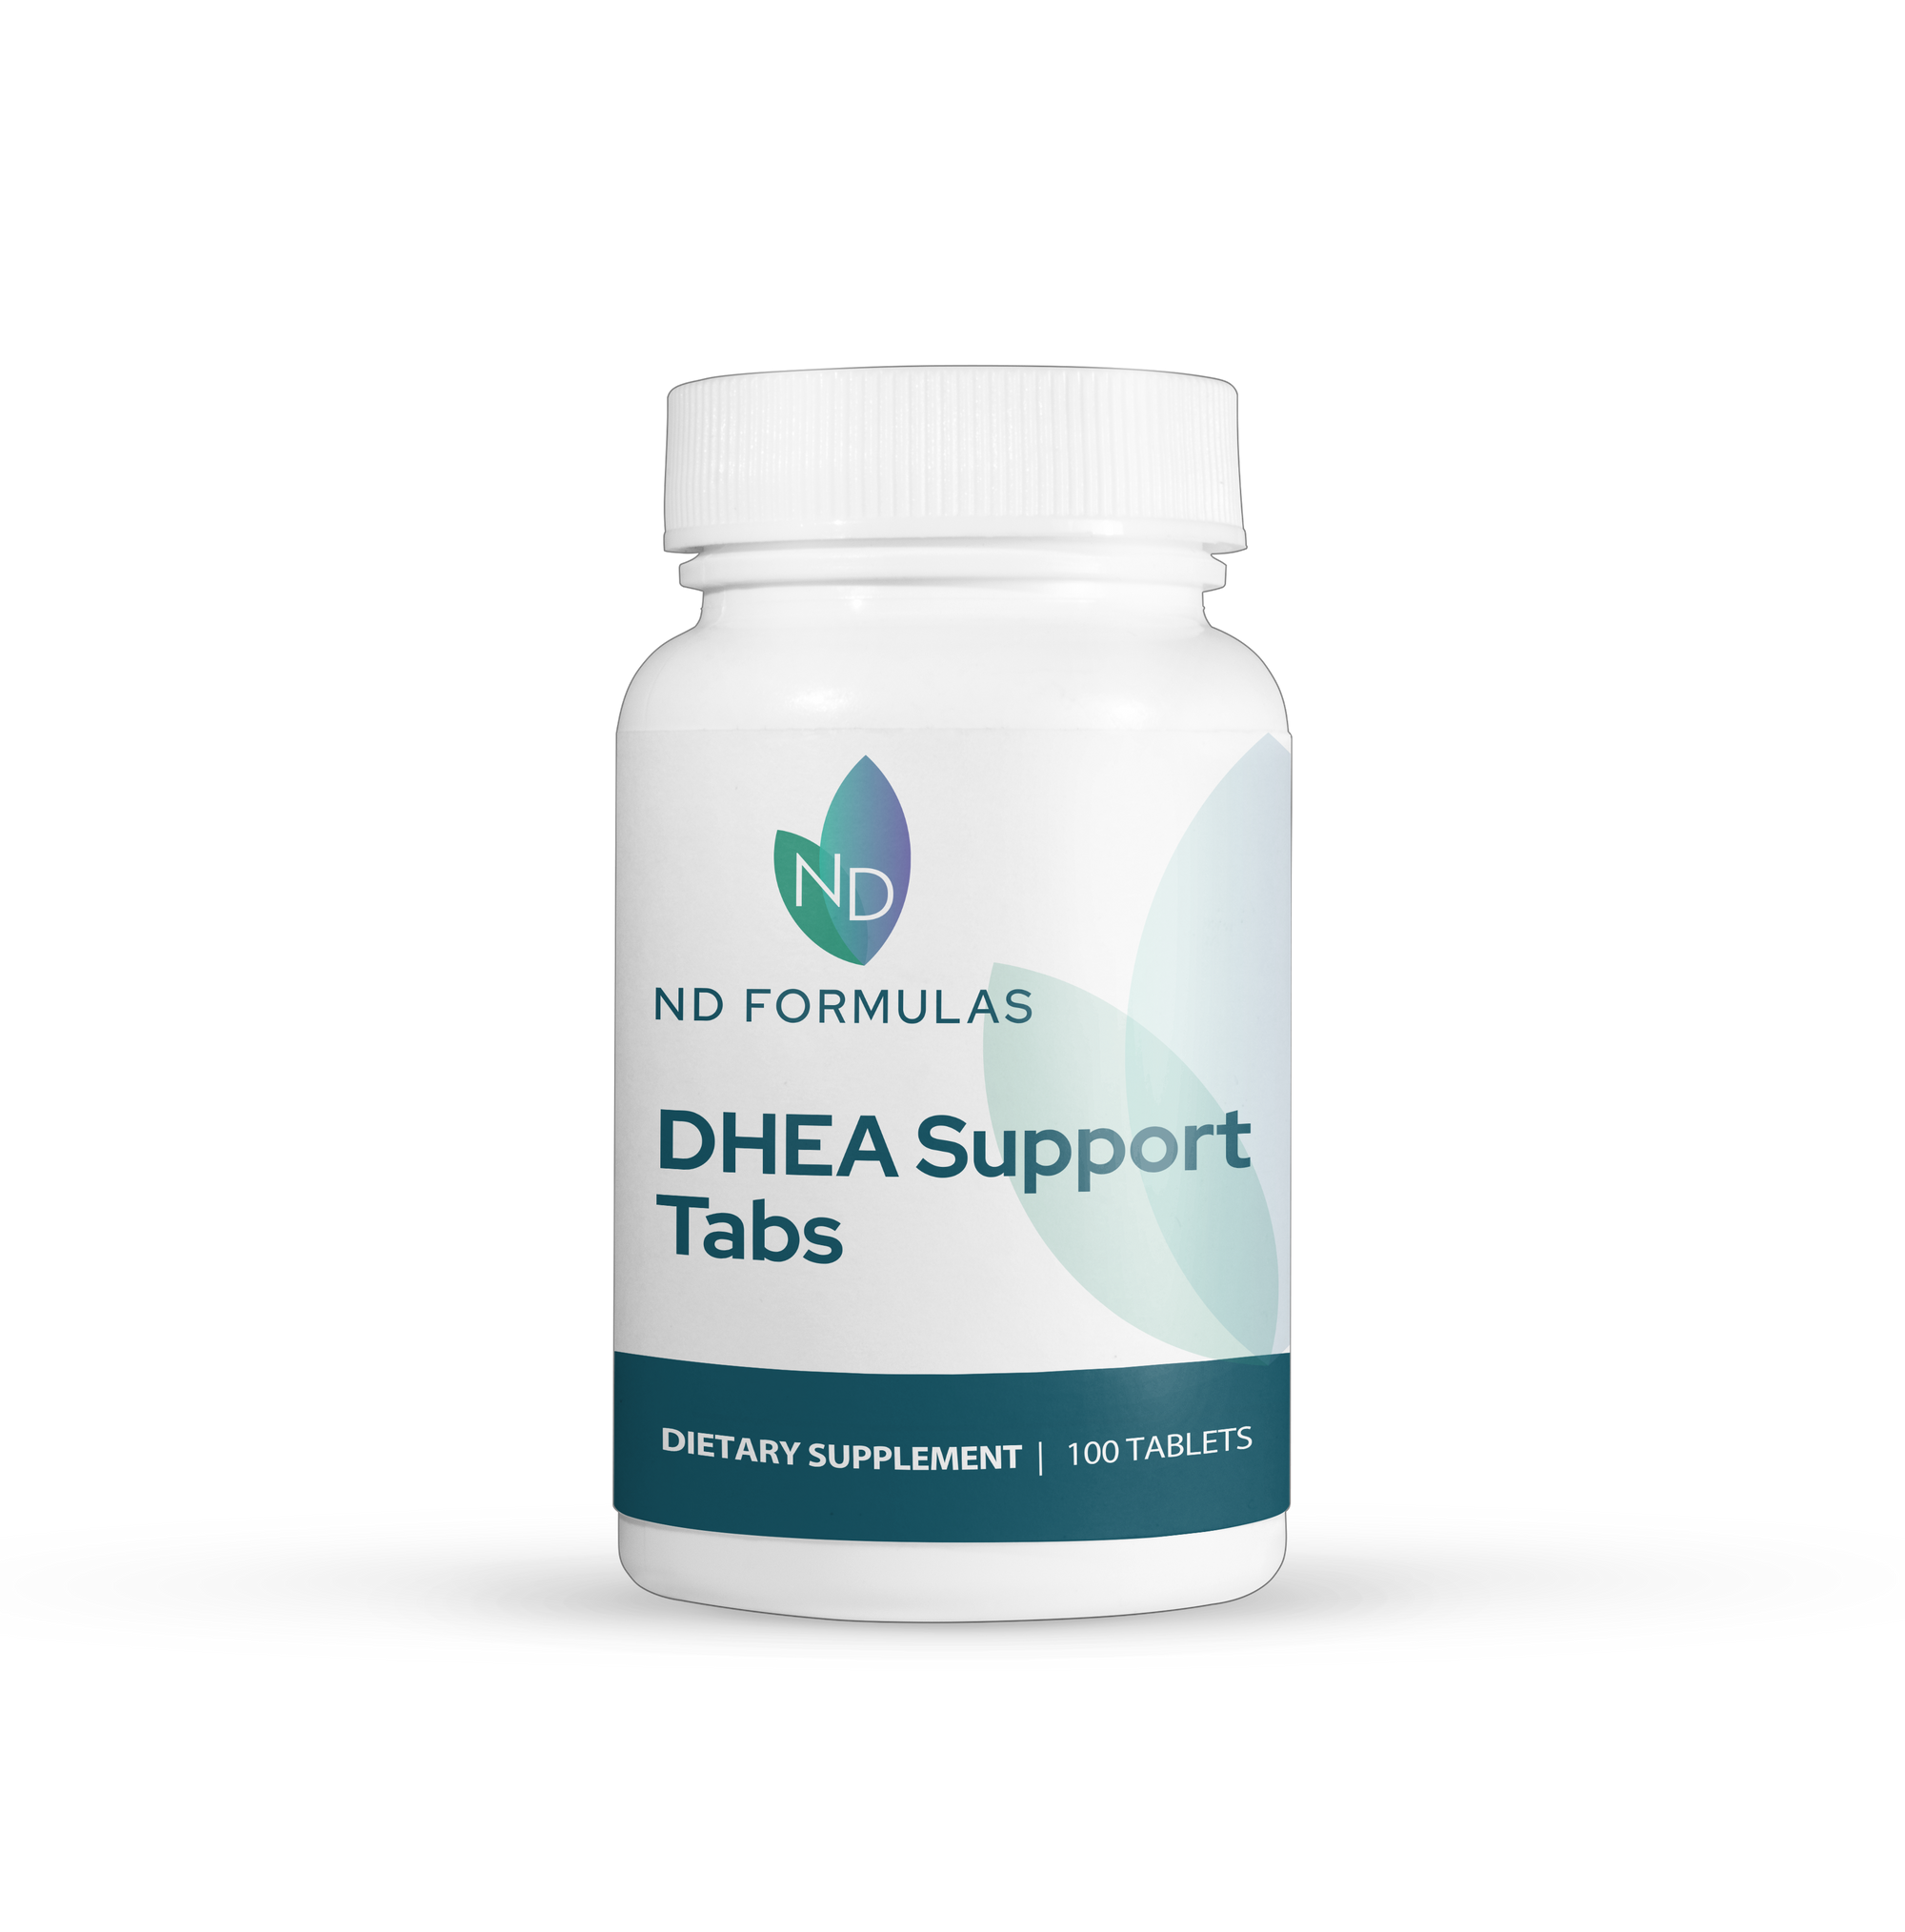 DHEA Support Tabs